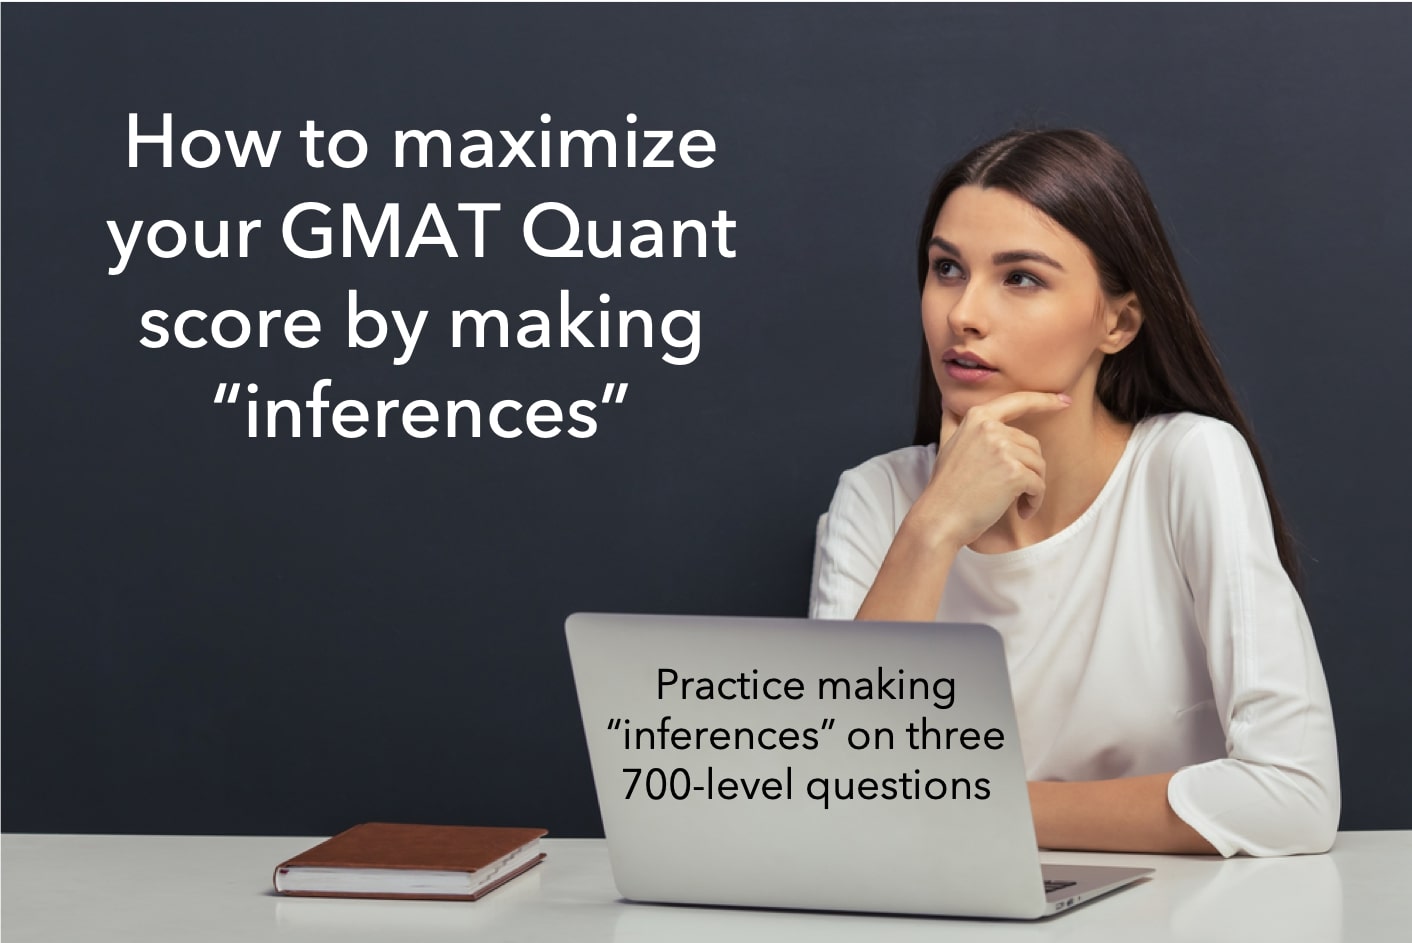 Why is “Infer” a critical process skill to master GMAT Quant?